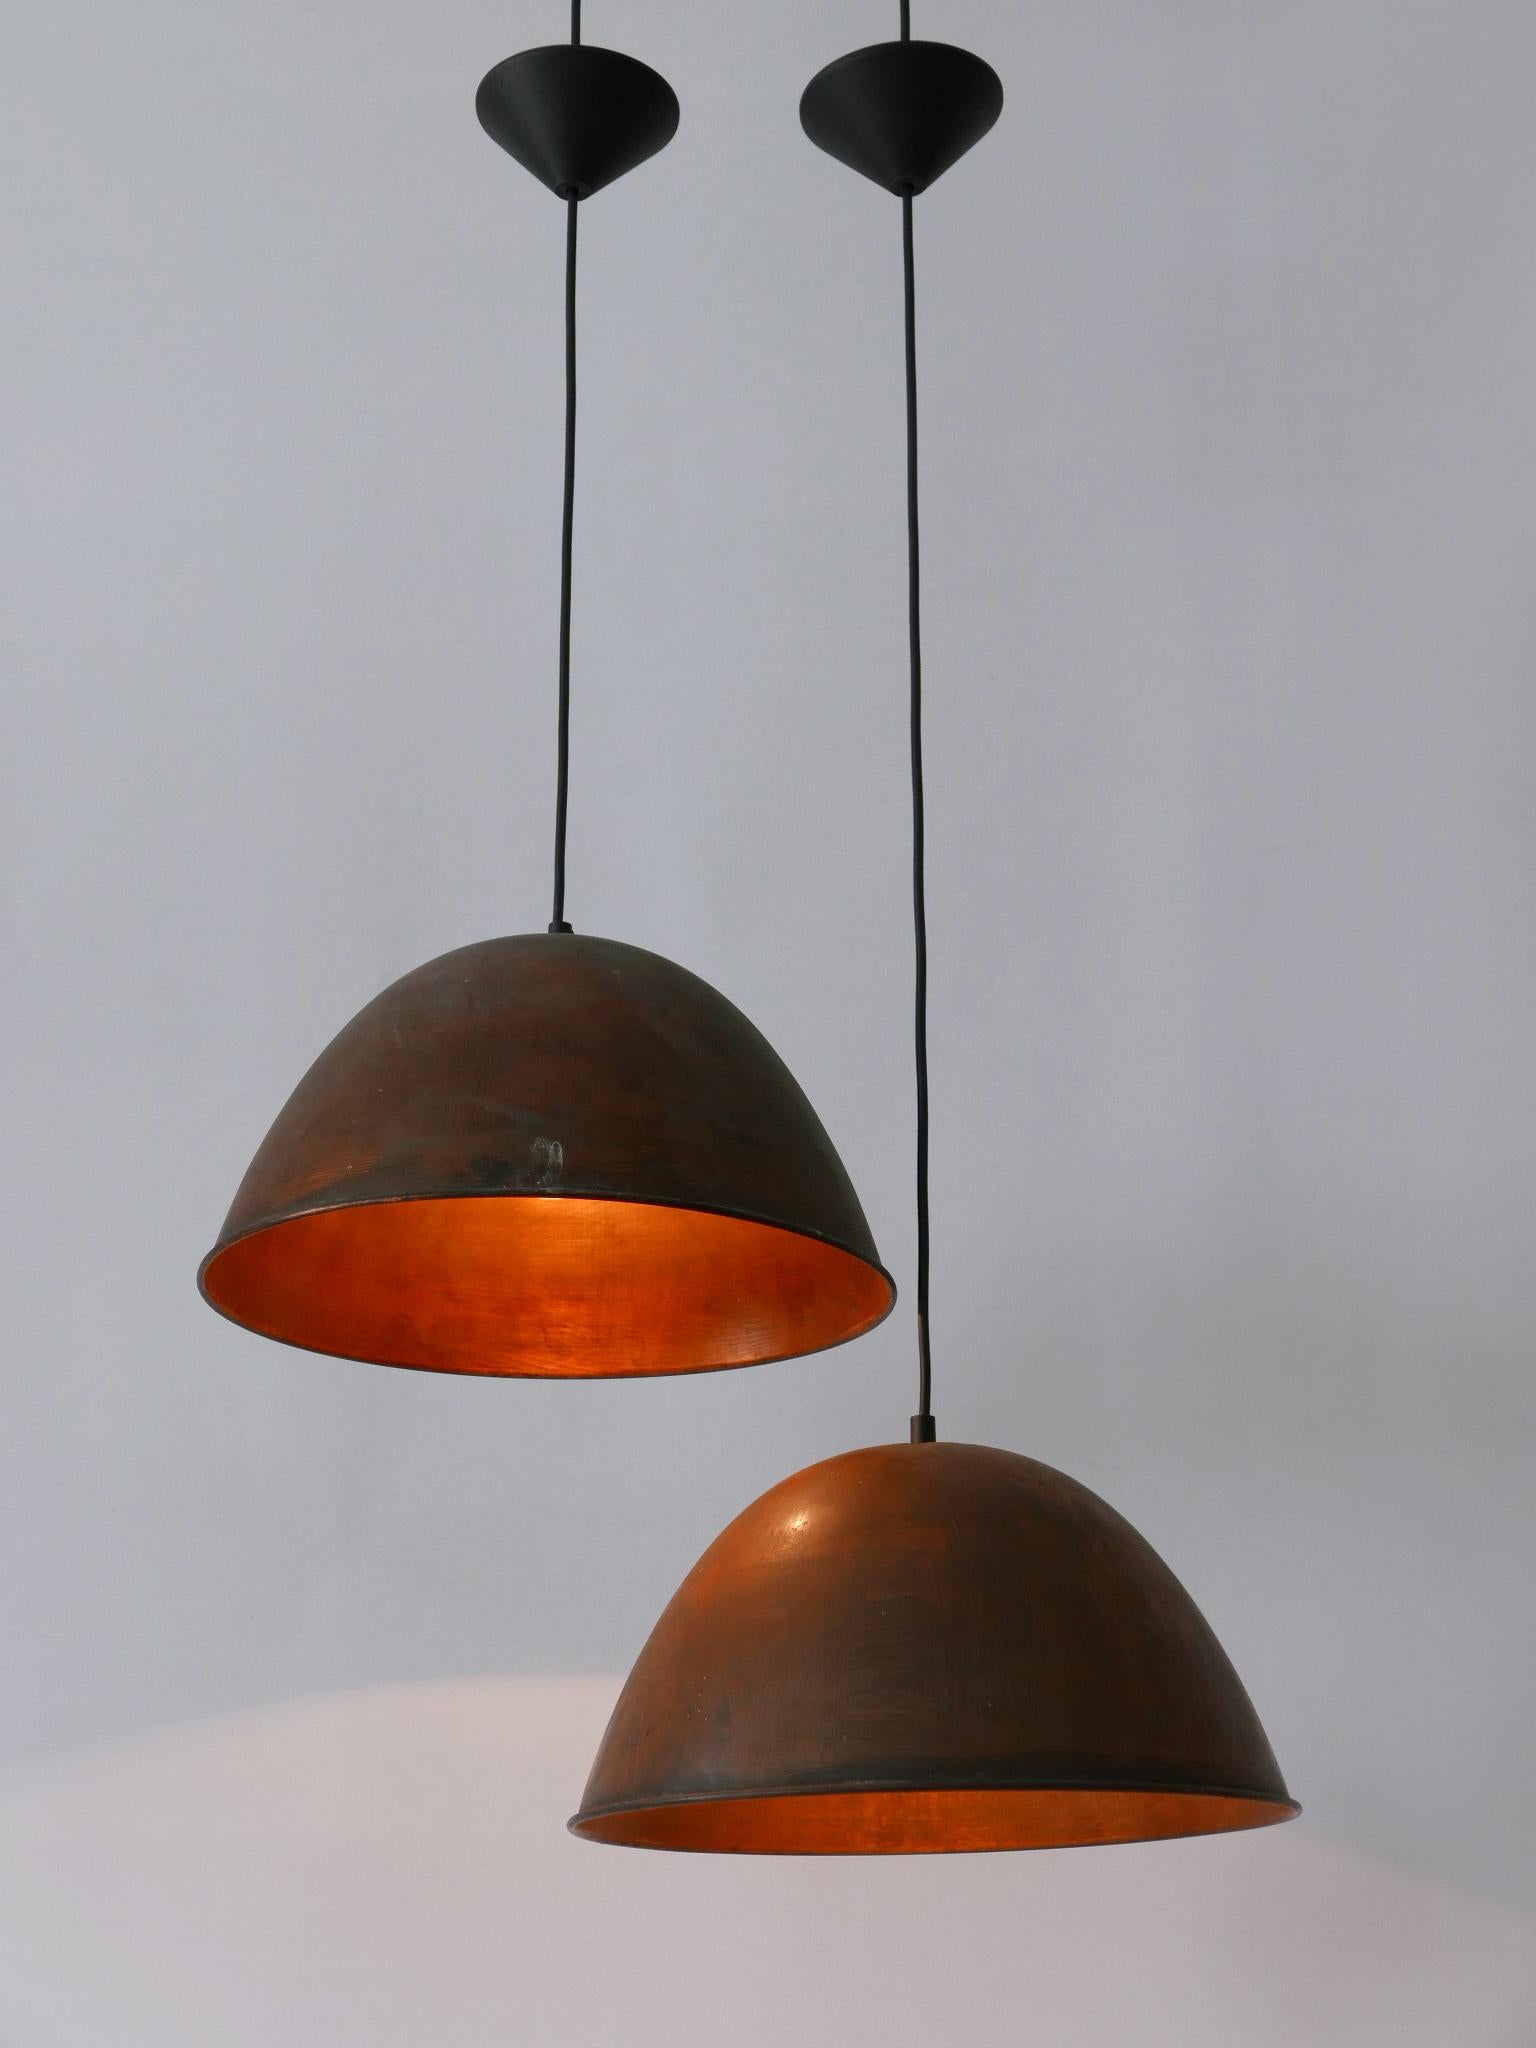 Set of Two Mid-Century Modern Copper Pendant Lamps or Hanging Lights 1950s For Sale 5